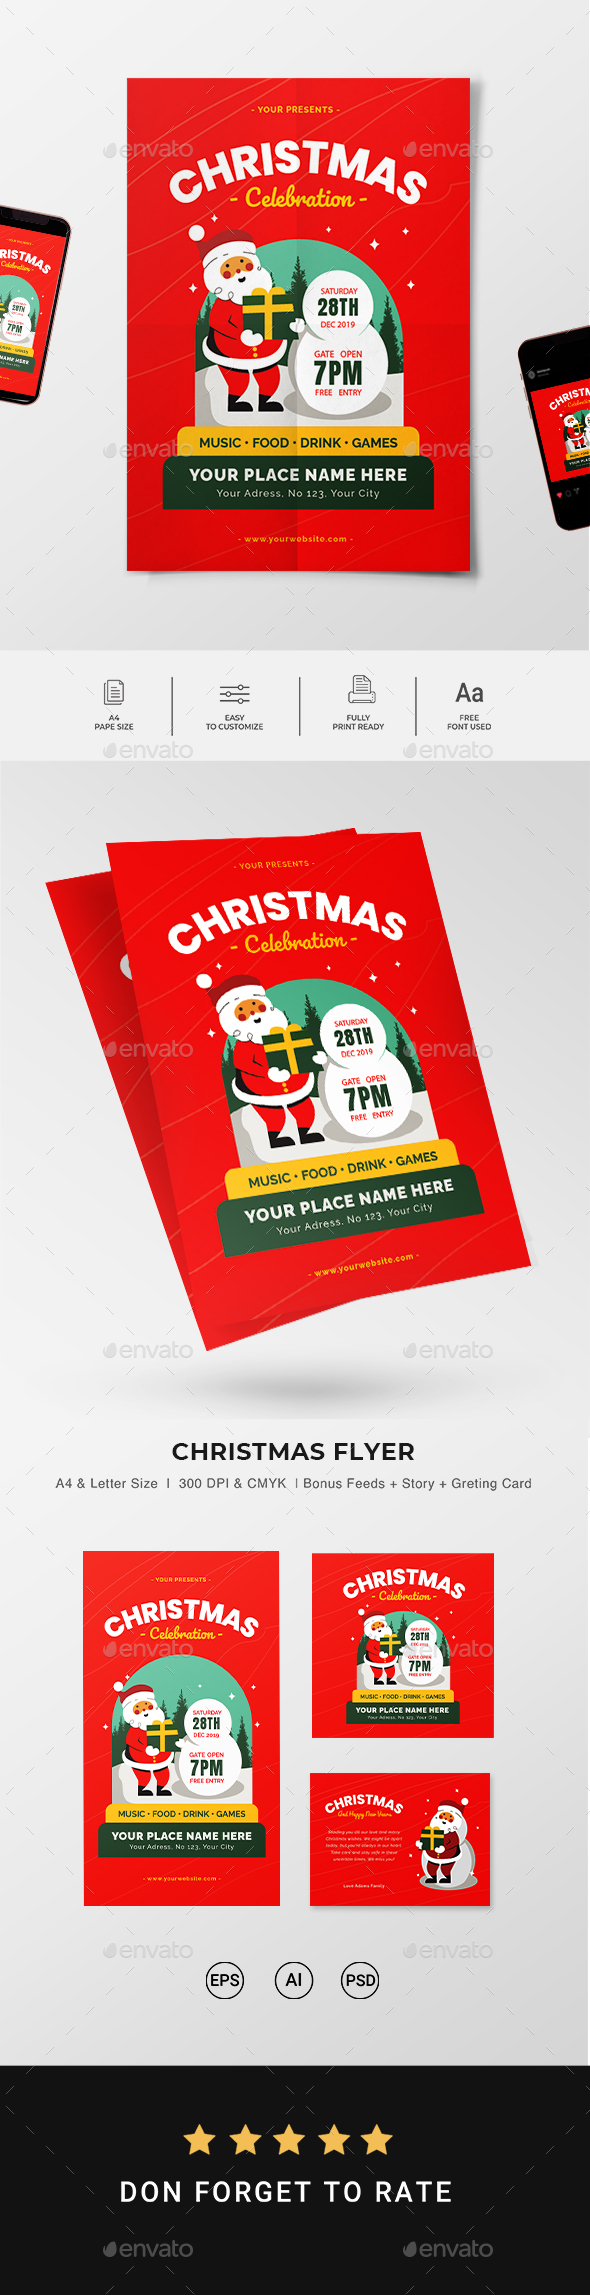 [DOWNLOAD]Christmas Flyer